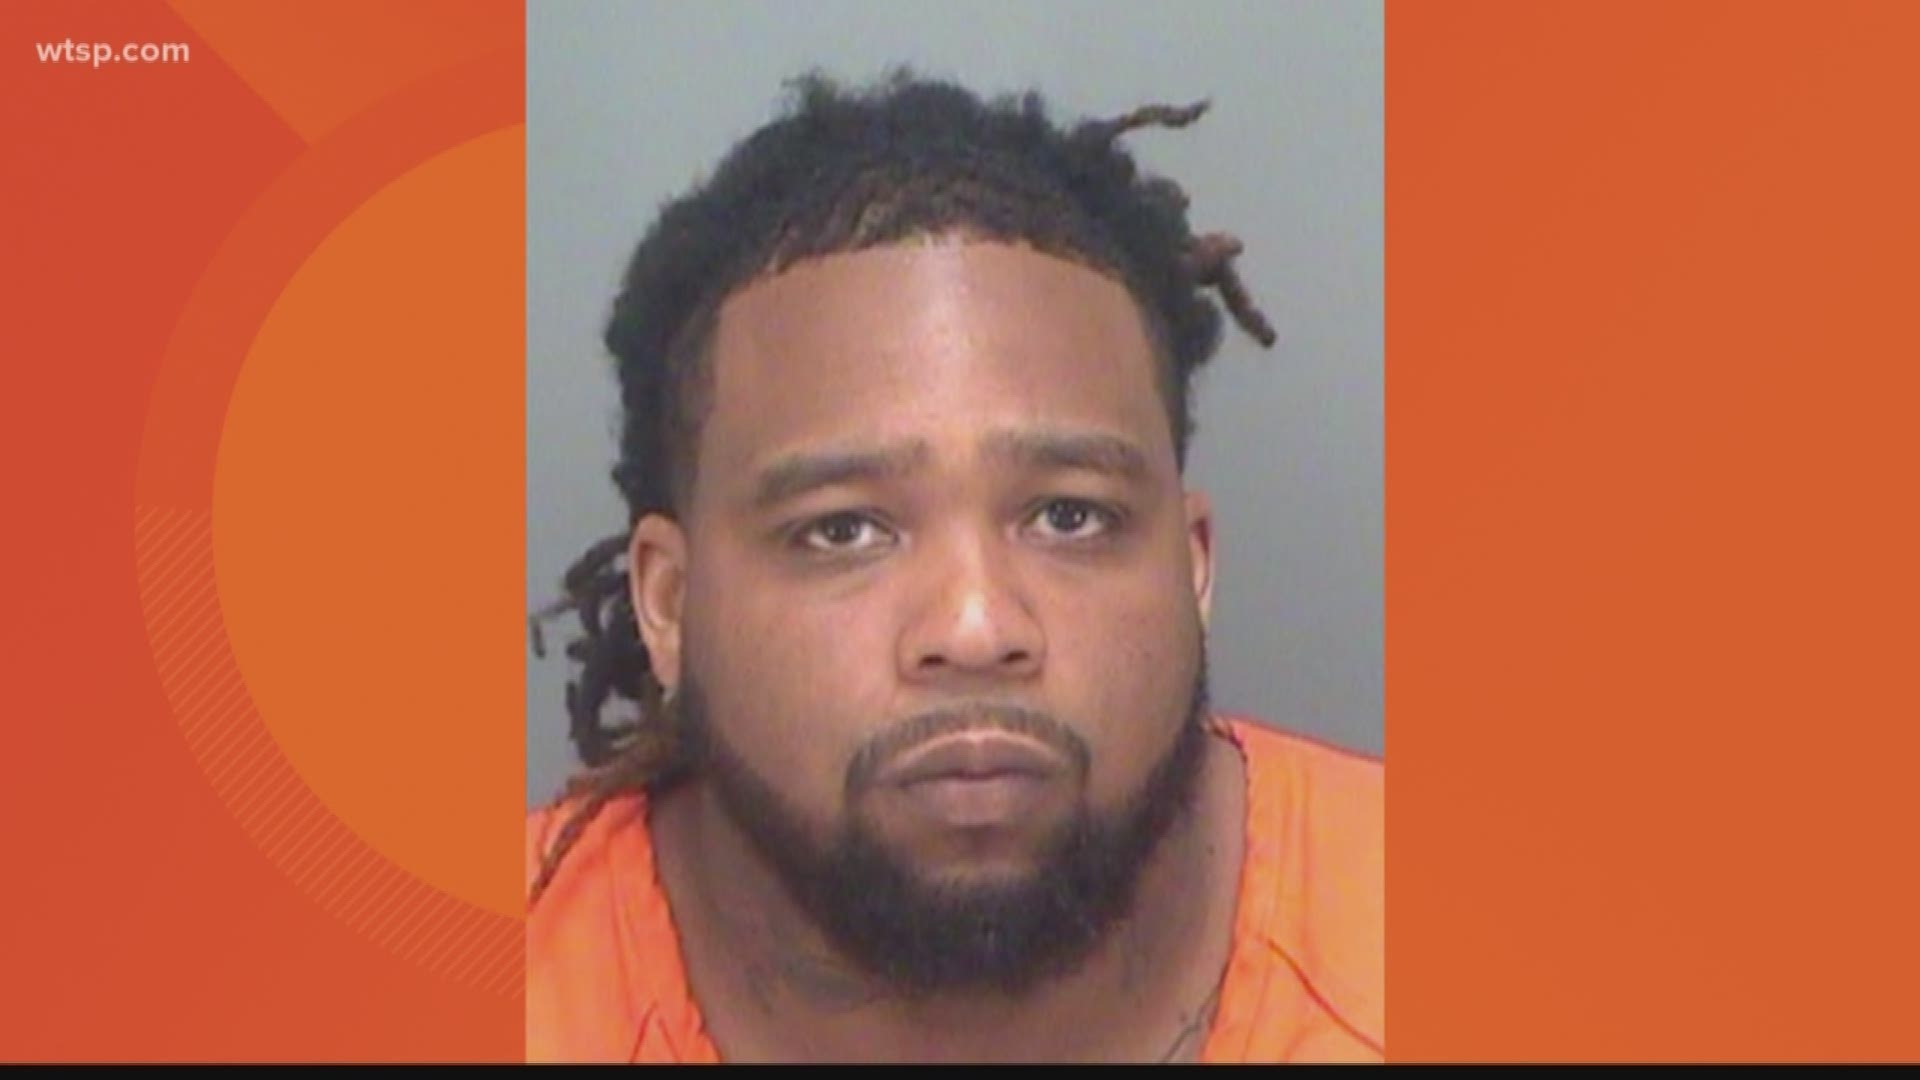 A man was shot and killed during an argument Saturday evening, Clearwater police say.

According to police, the report of a shooting came in around 11 p.m. on Grove Street. 

Police say the shooting happened after an argument between two men over a parking spot. Deshon Powers, 26, is accused of getting a gun from his house and shooting Derek Omasta, 31.